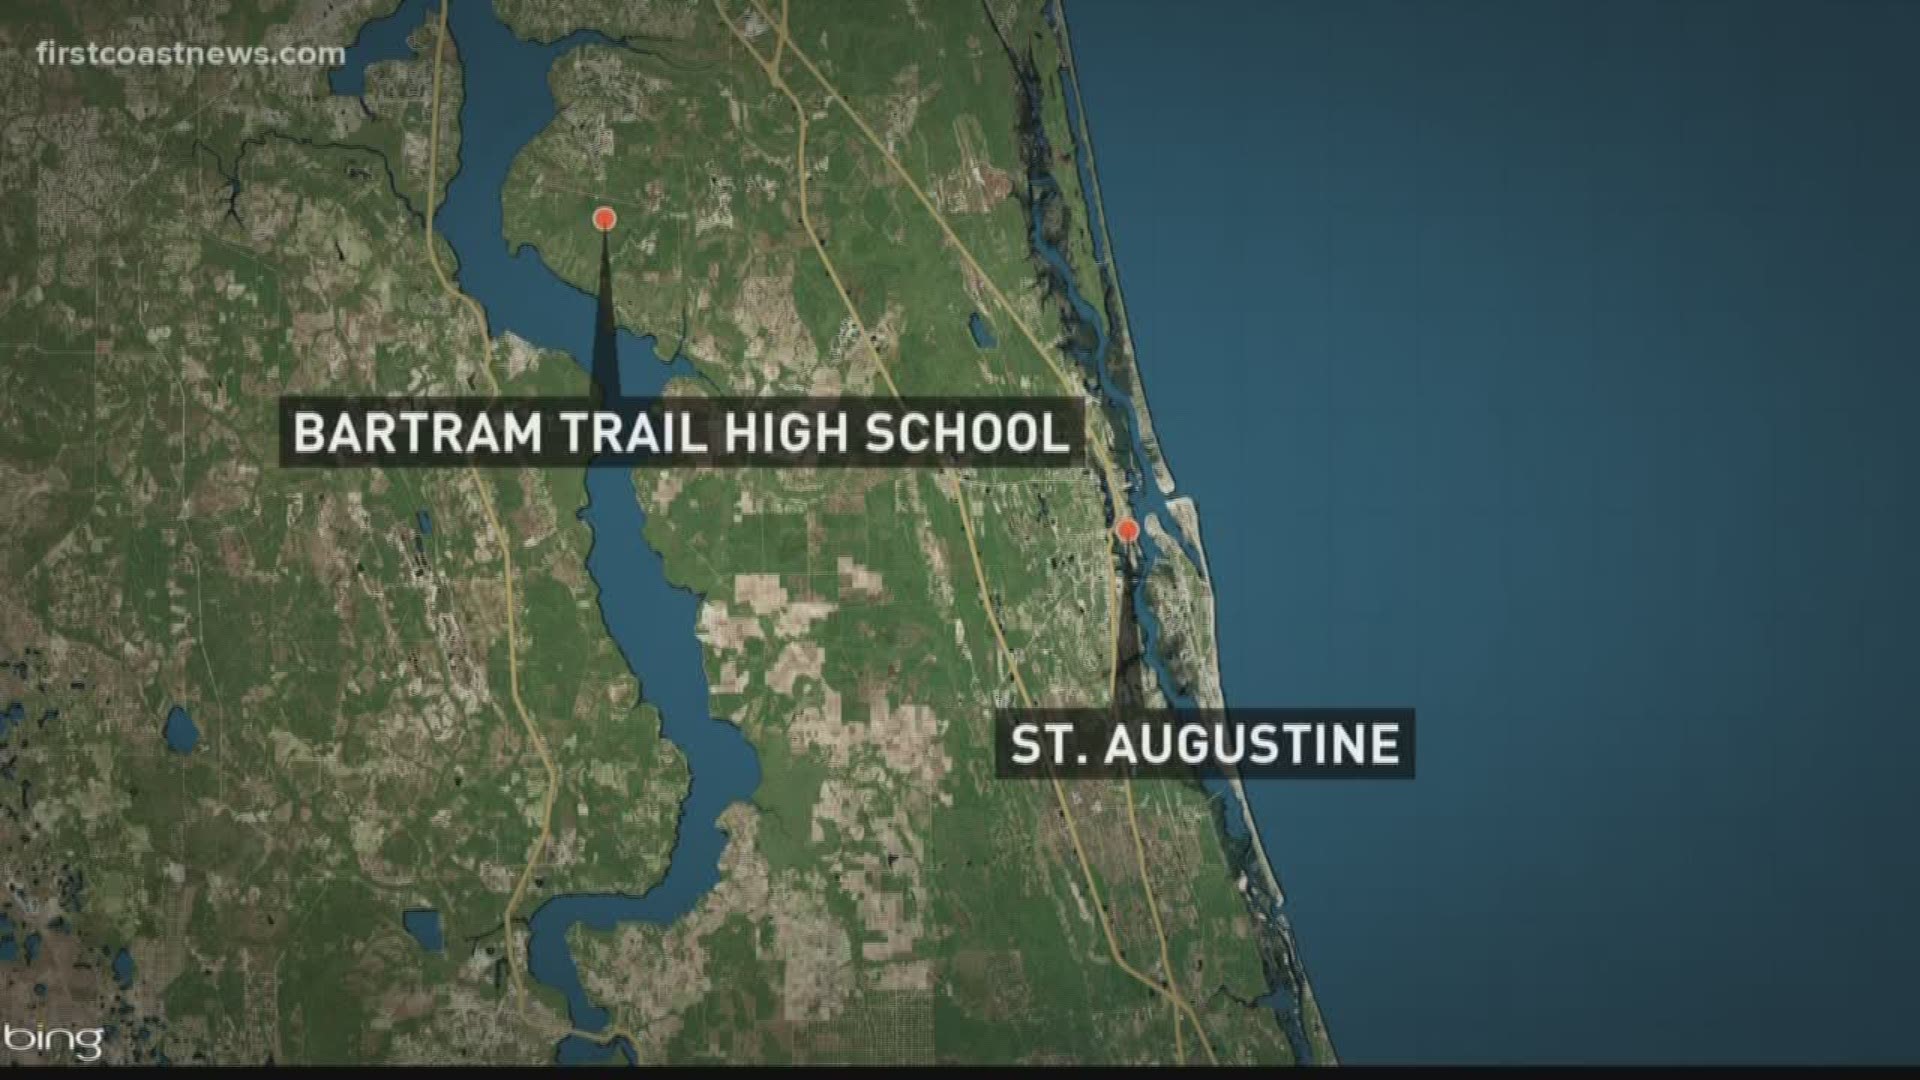 A threat was found on the mirror at Bartram Trail High School, resulting in early dismissal.